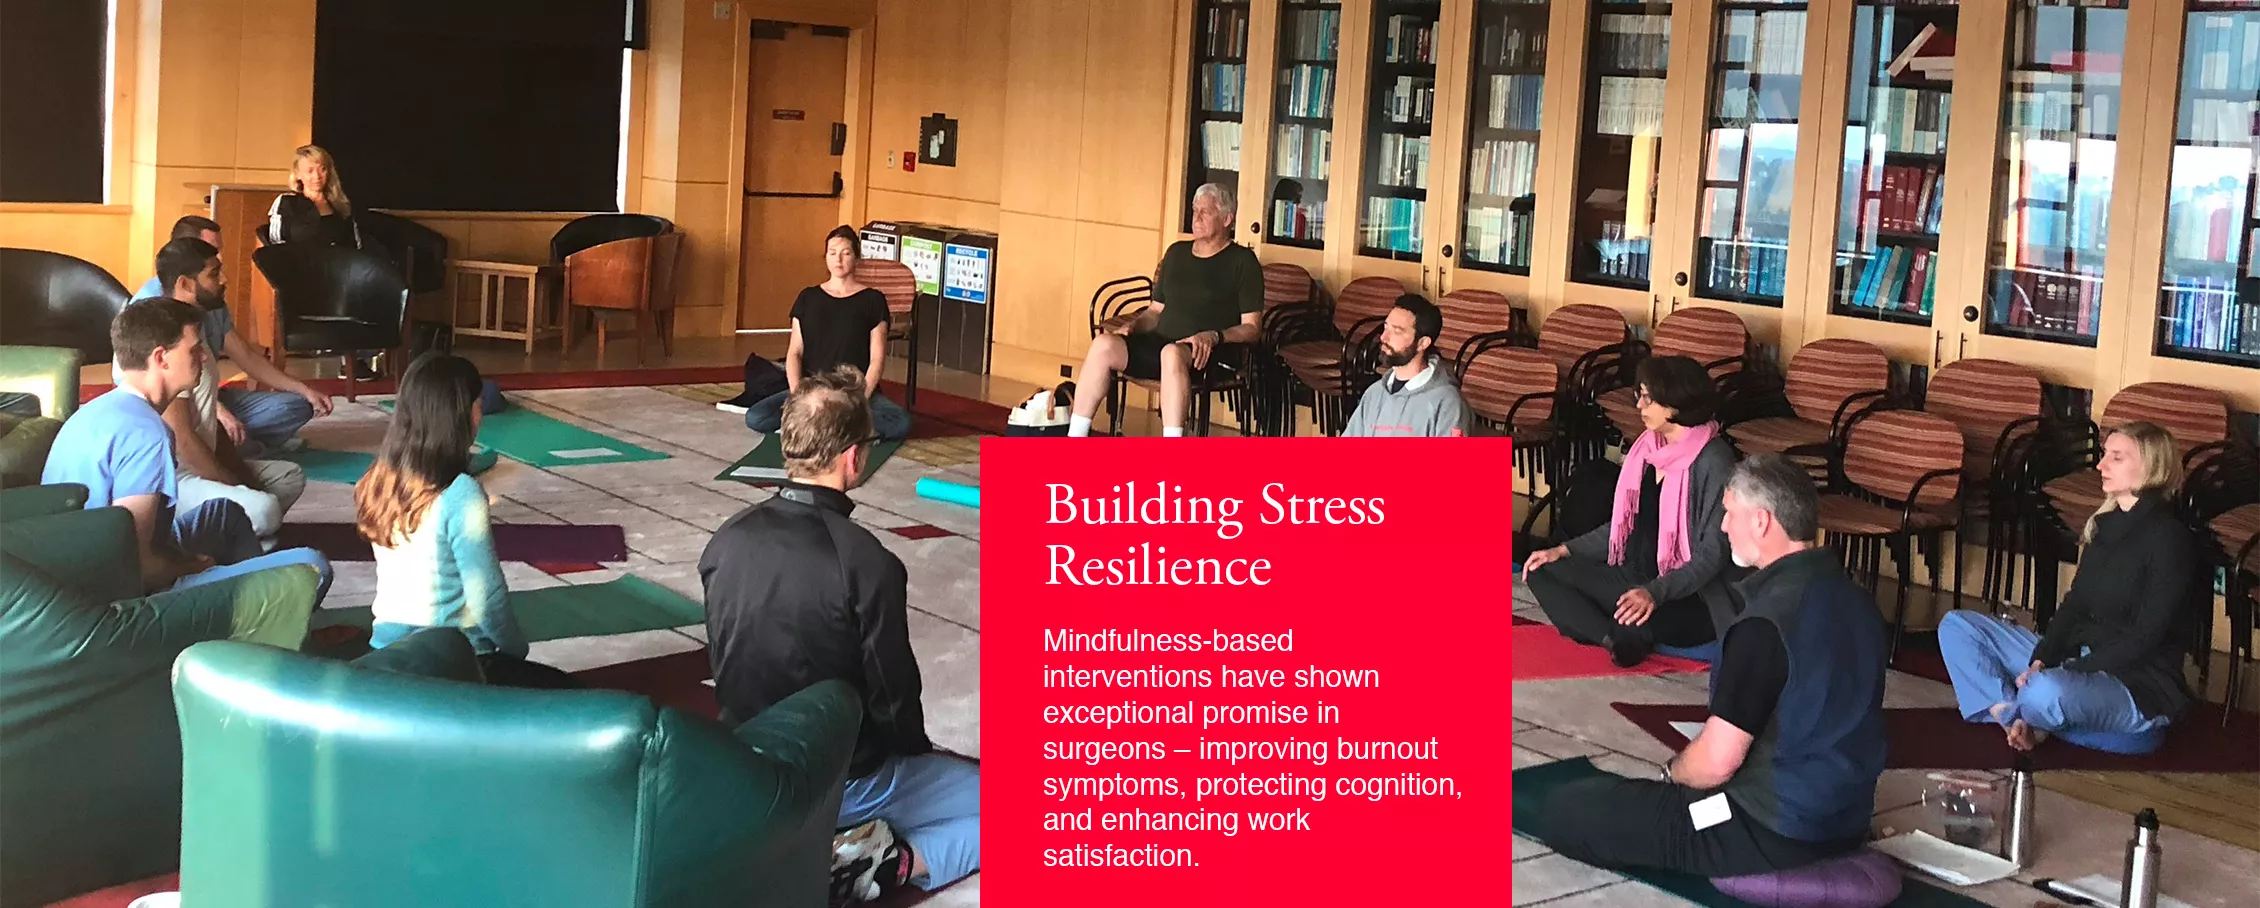 Building Stress Resilience Session